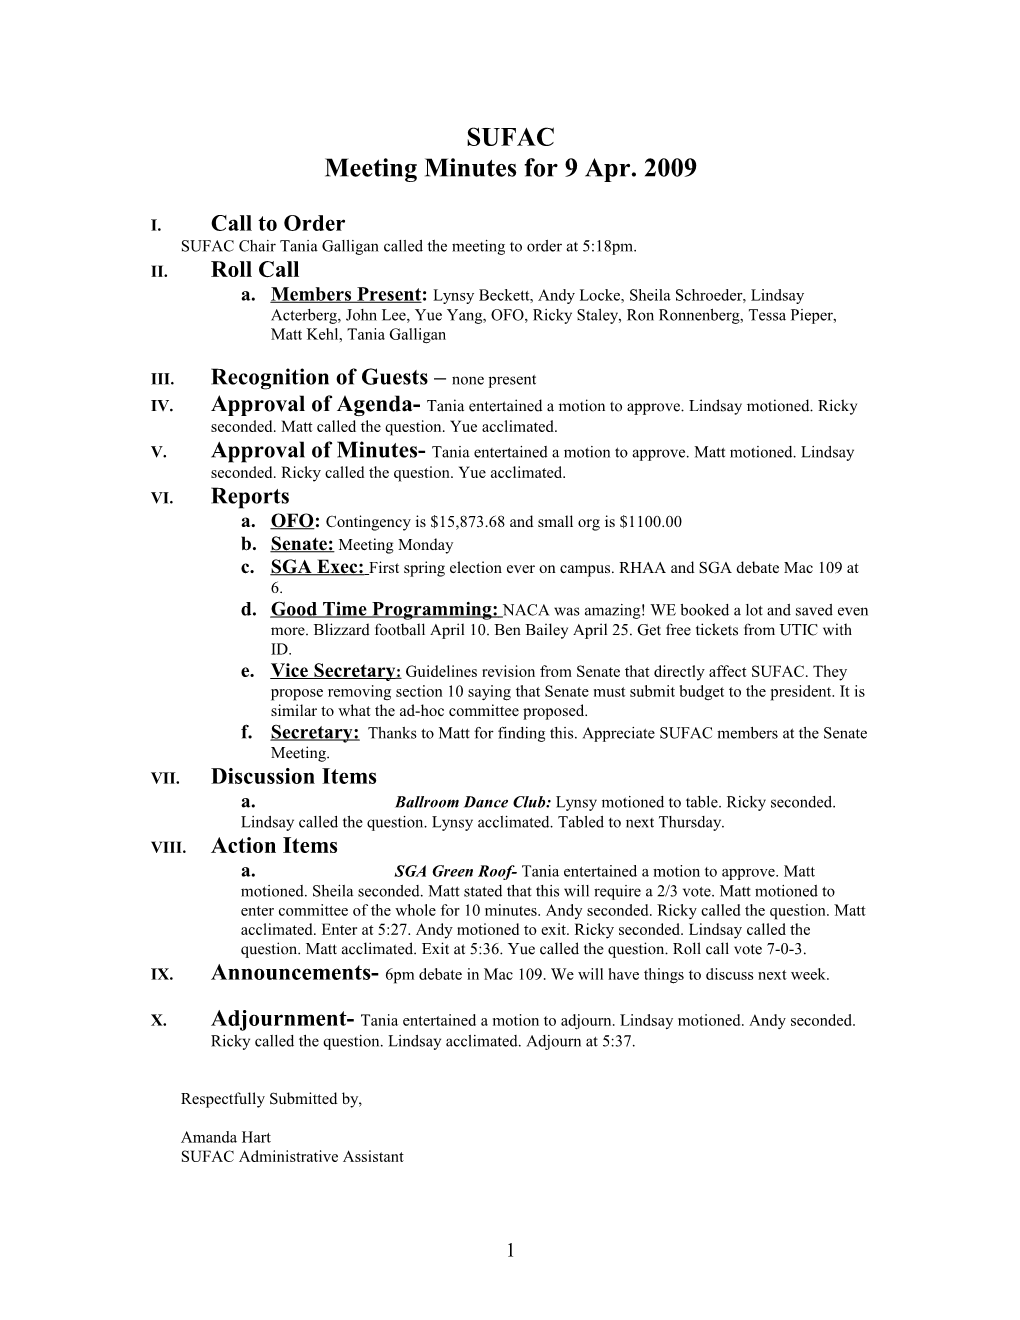 Meeting Minutes for 9 Apr. 2009